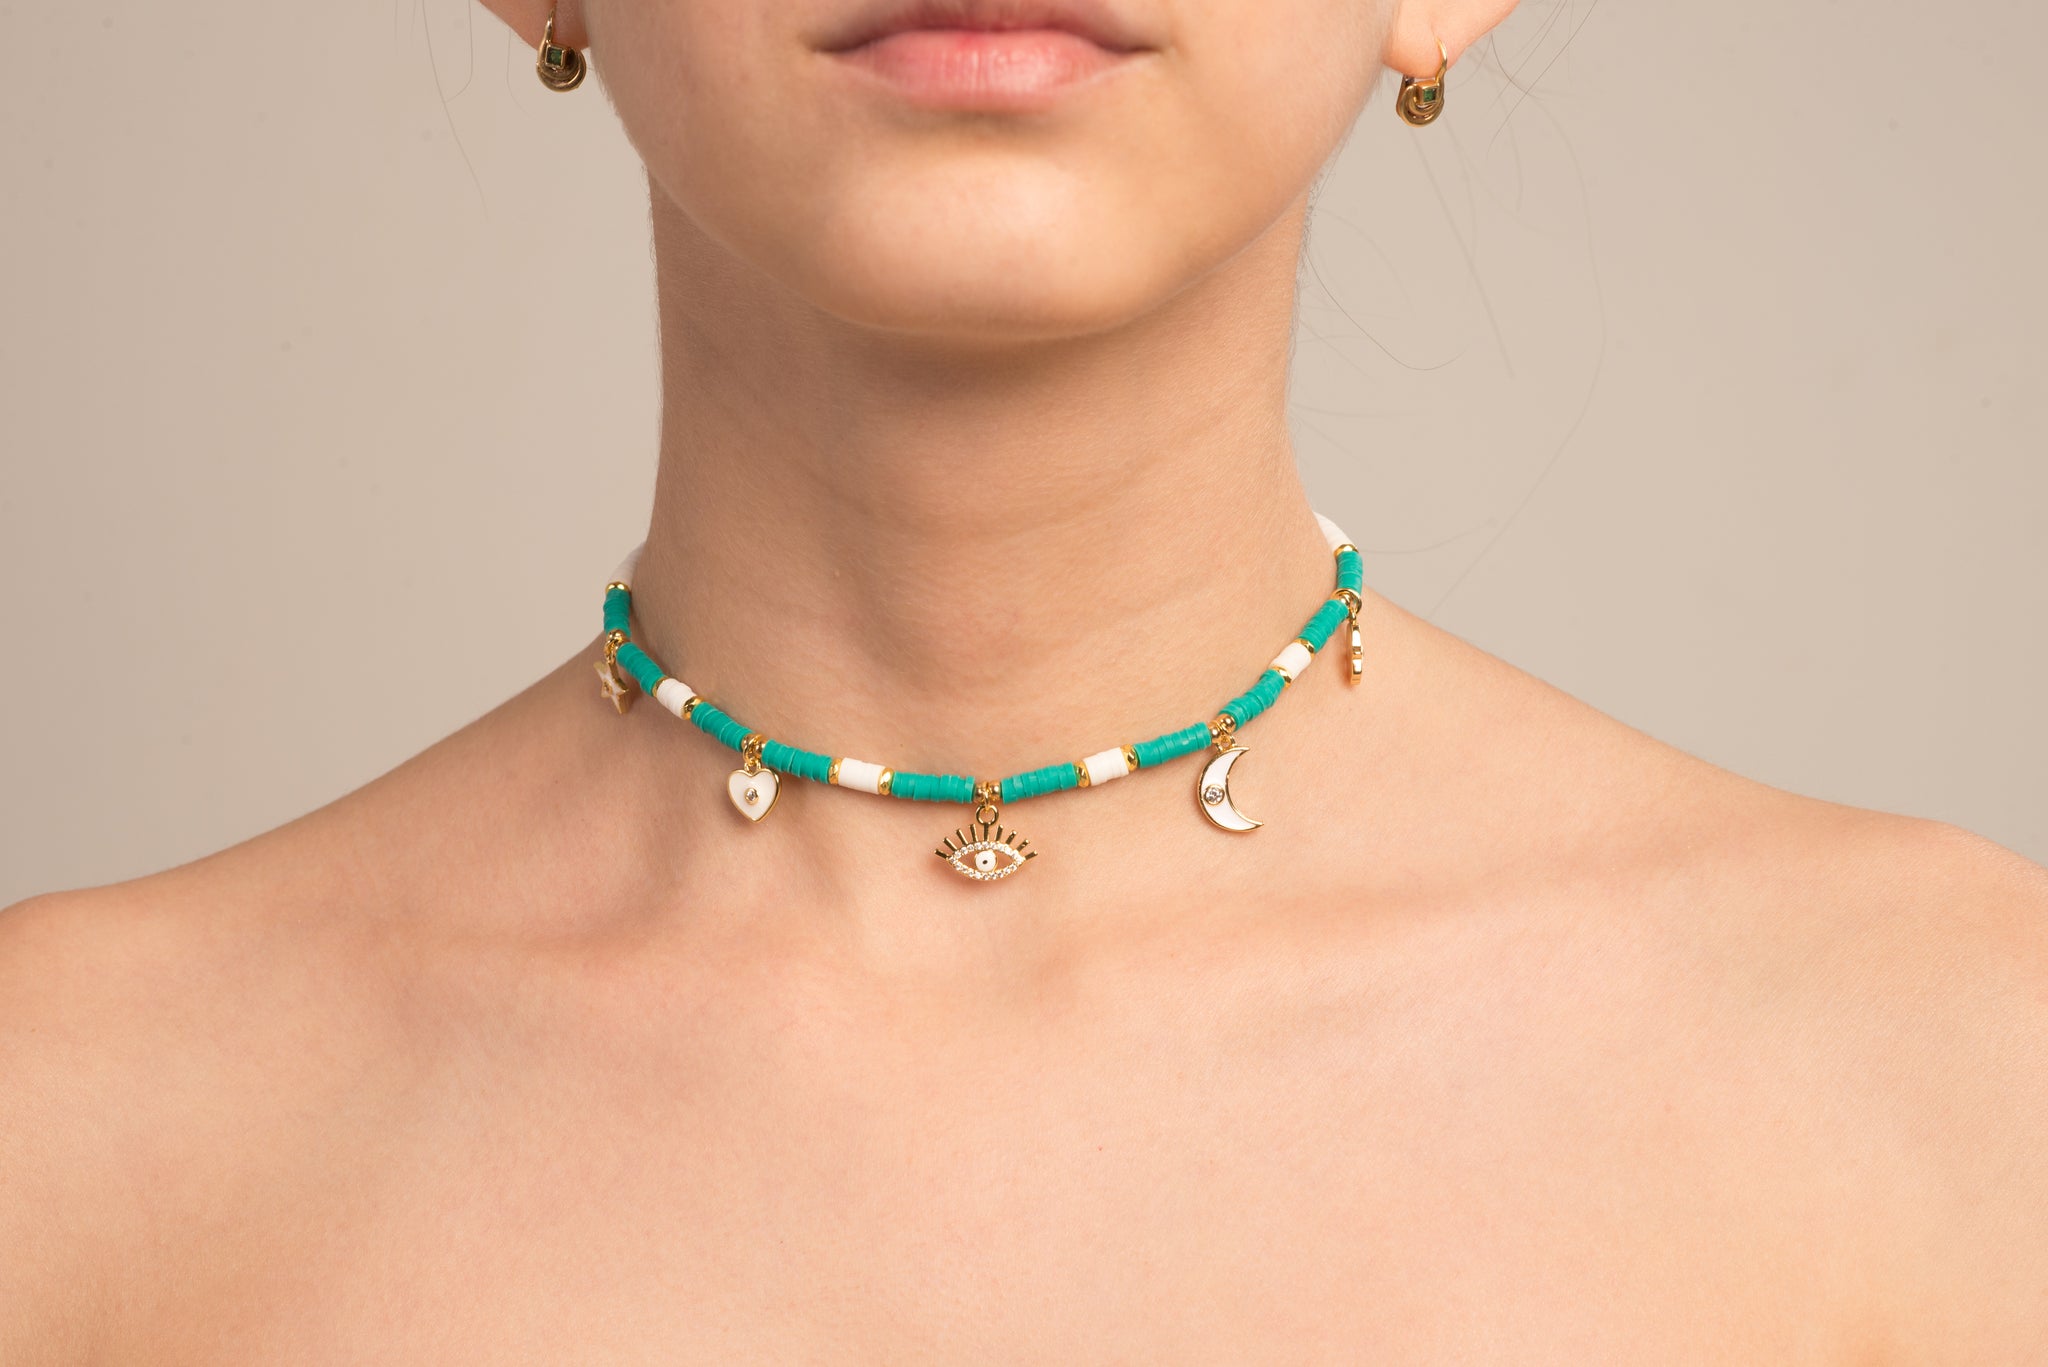 White and Teal Choker